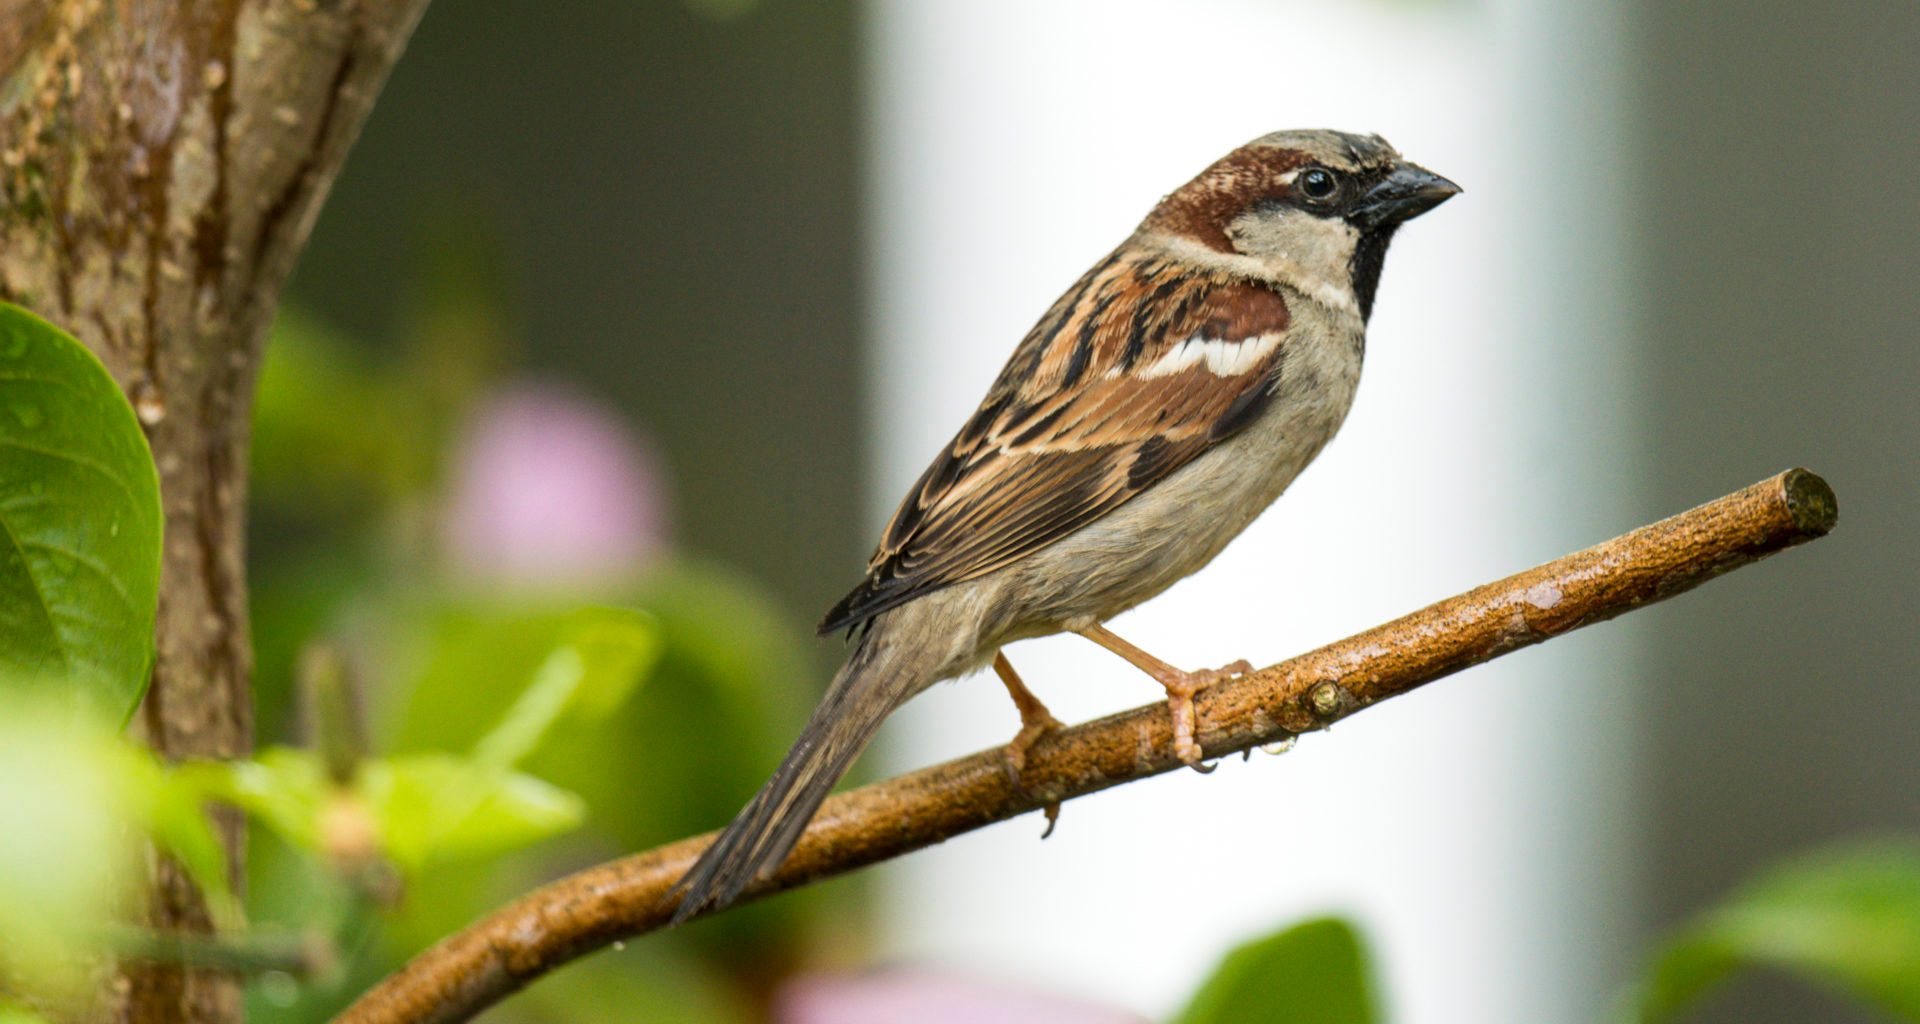 Animal rights groups condemn crude oil experiments on sparrows 5